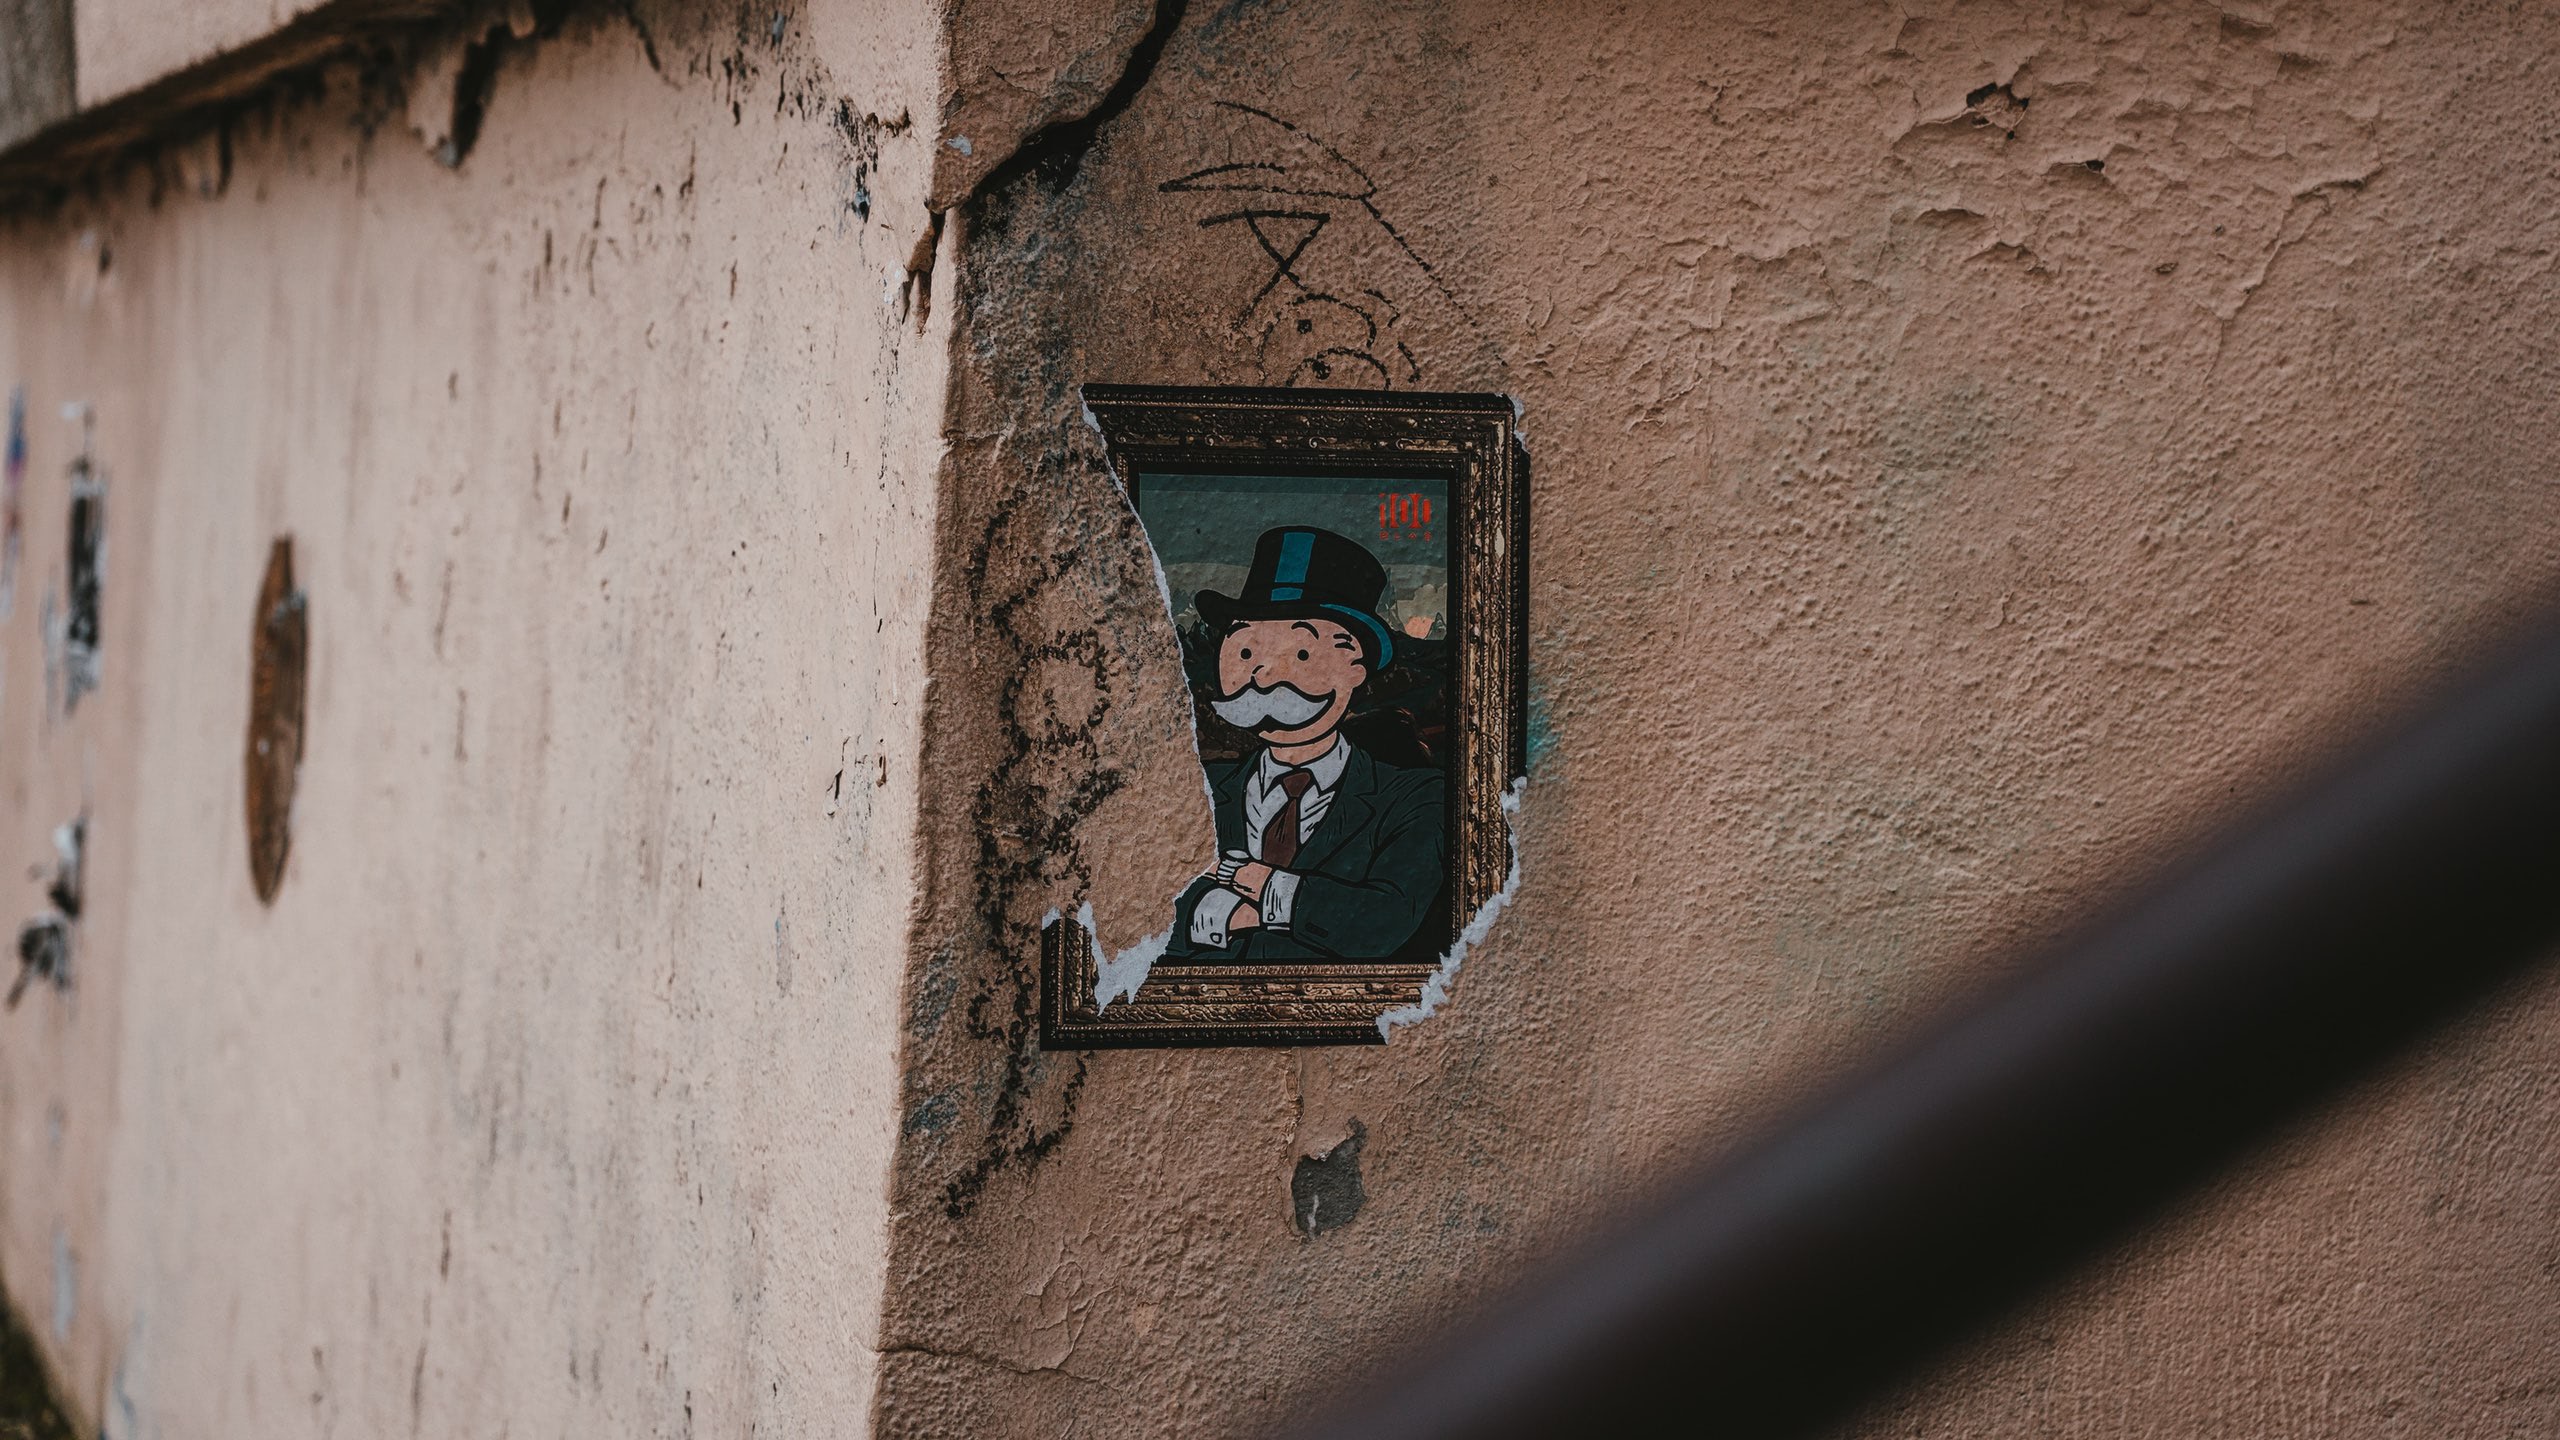 Cracked wall with a piece of art showing the monopoly man